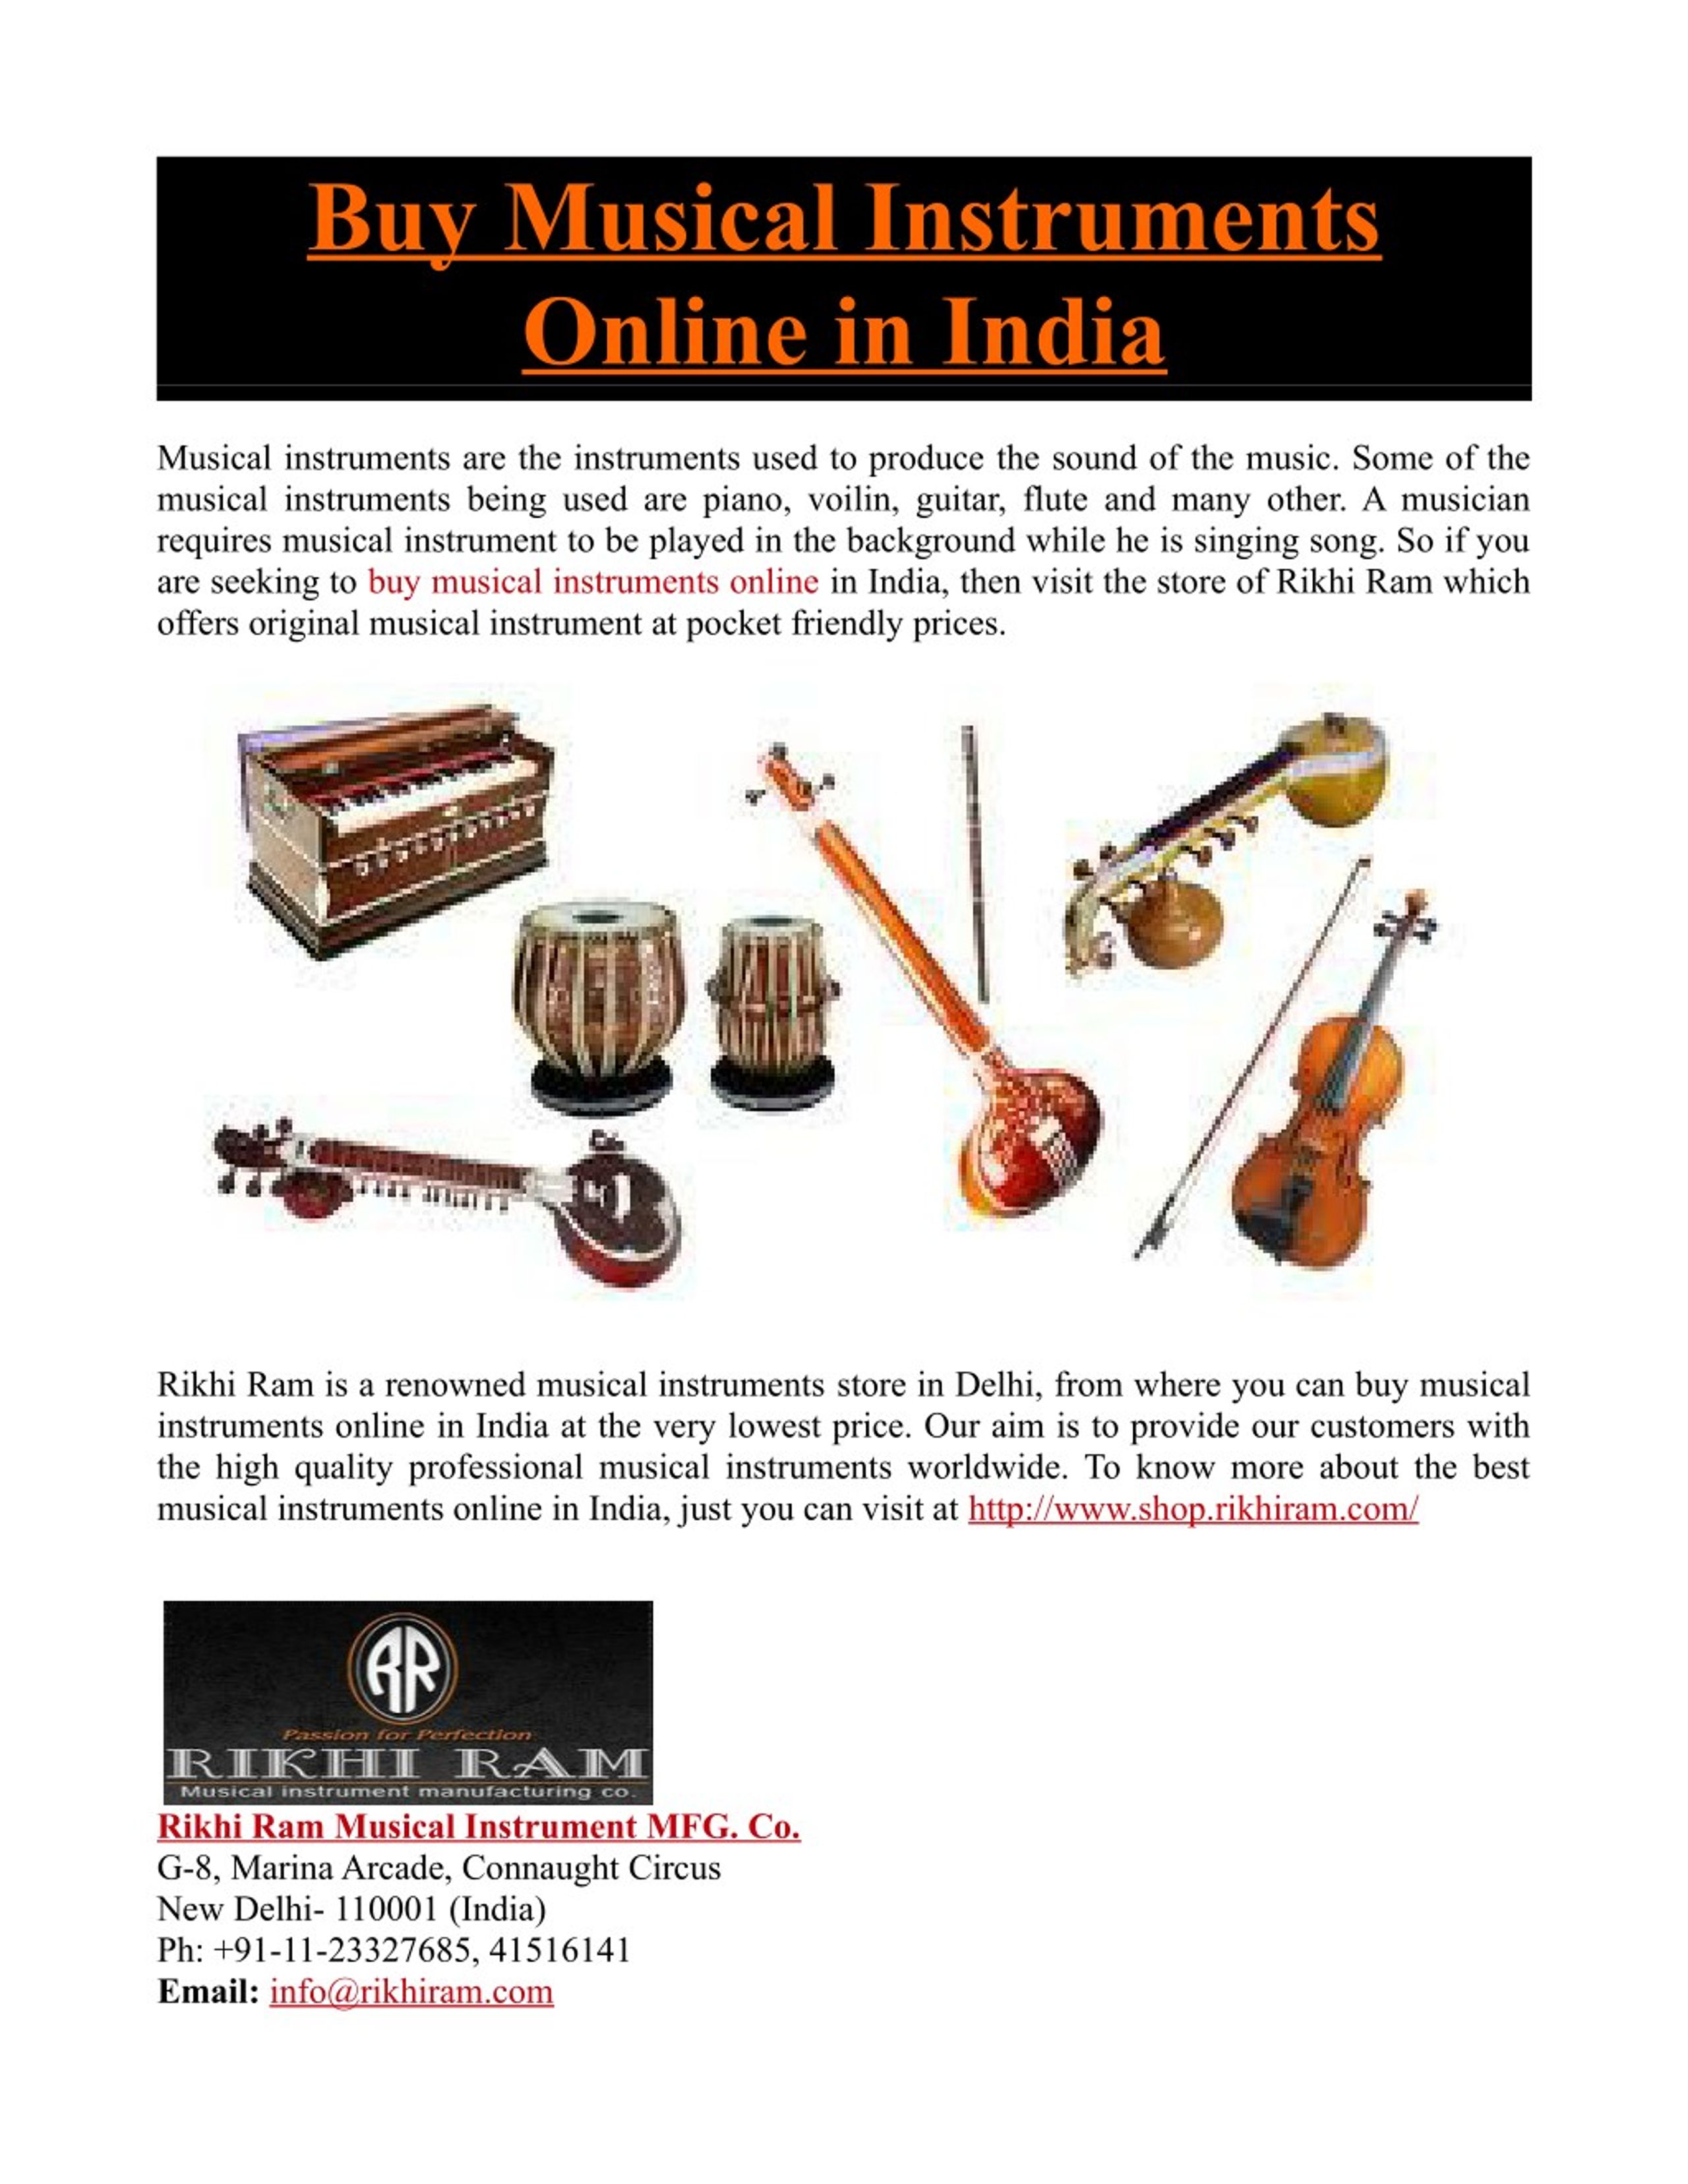 PPT - Buy Musical Instruments Online in India PowerPoint Presentation